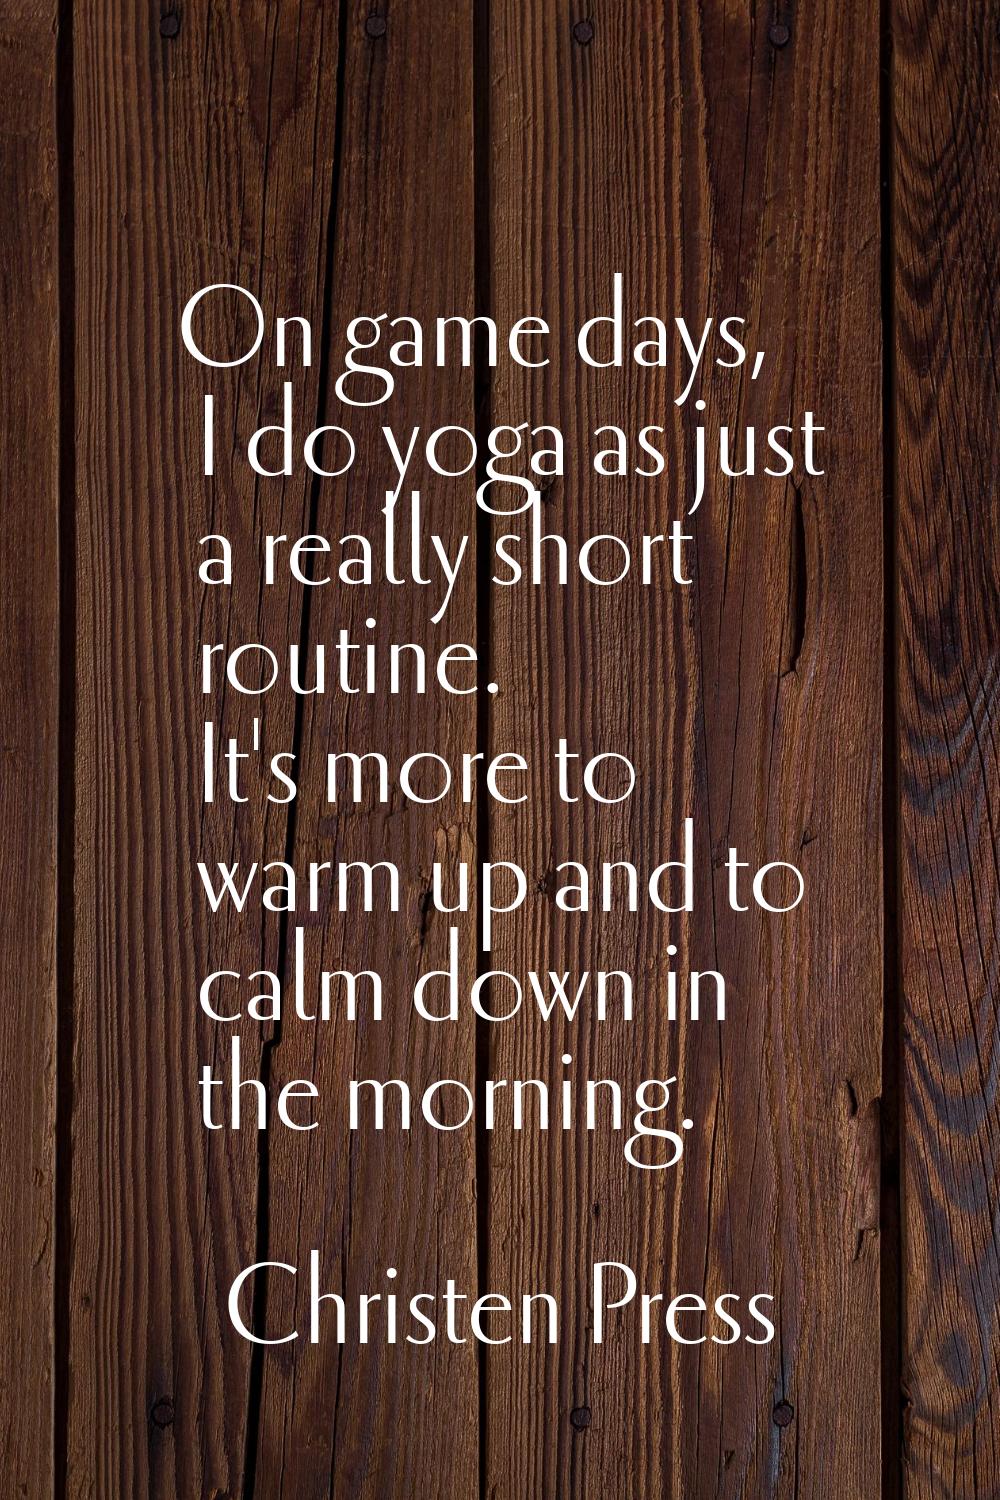 On game days, I do yoga as just a really short routine. It's more to warm up and to calm down in th